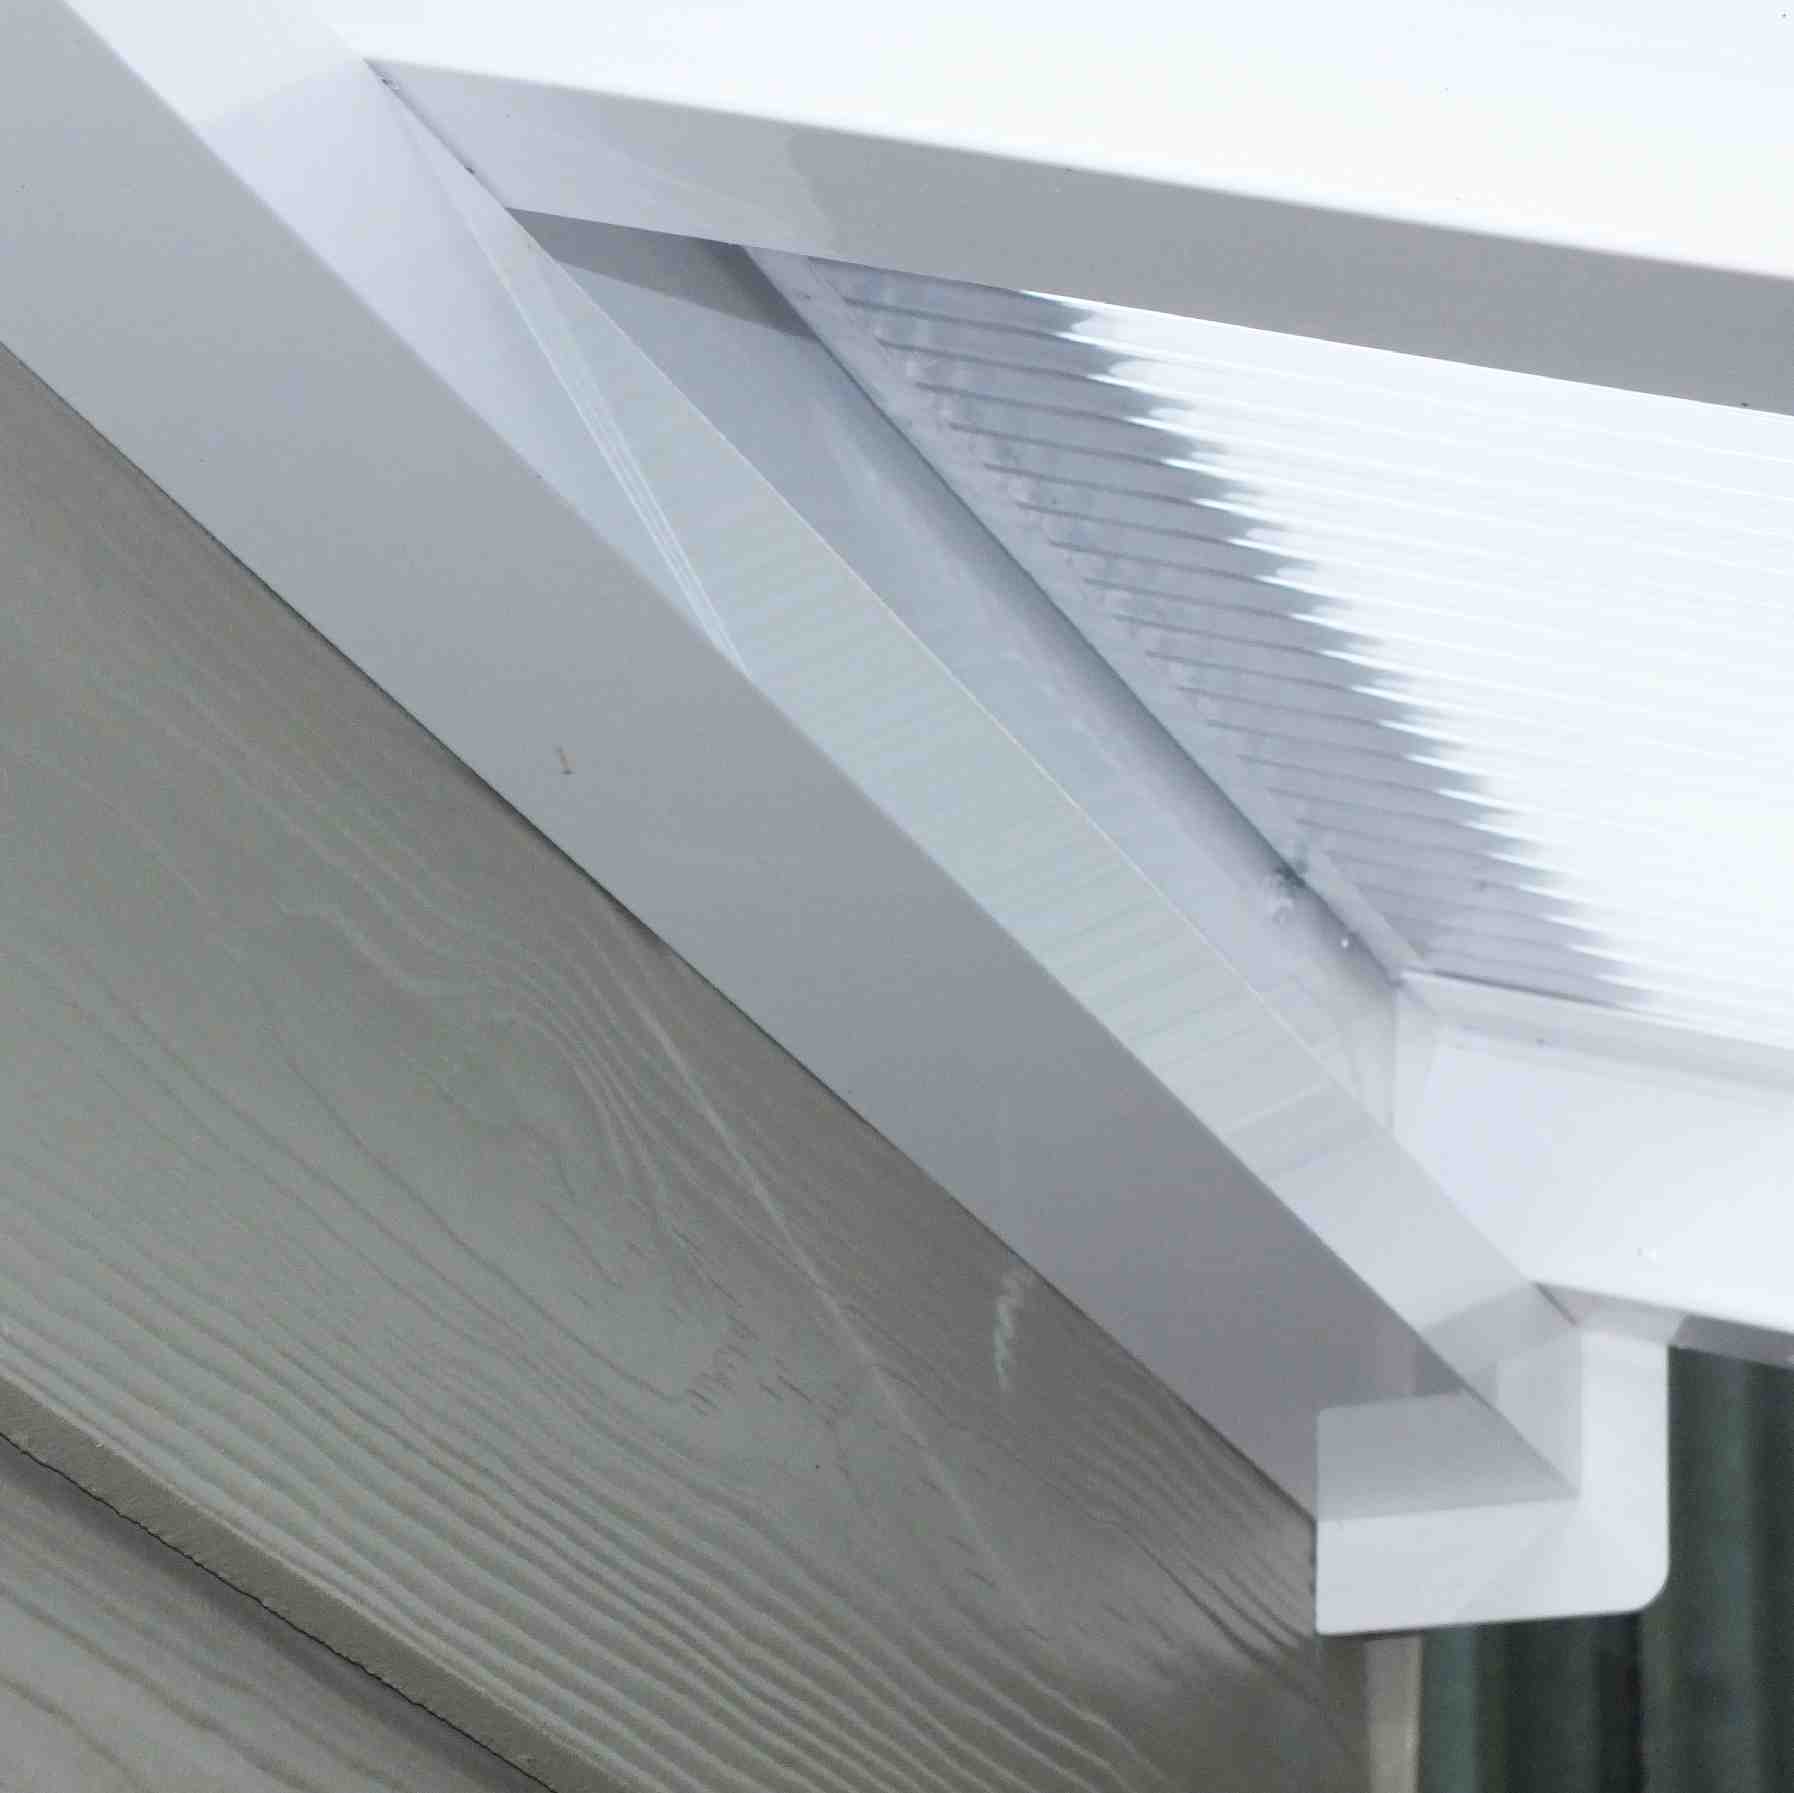 Great deals on Omega Verandah White with 16mm Polycarbonate Glazing - 11.6m (W) x 1.5m (P), (5) Supporting Posts